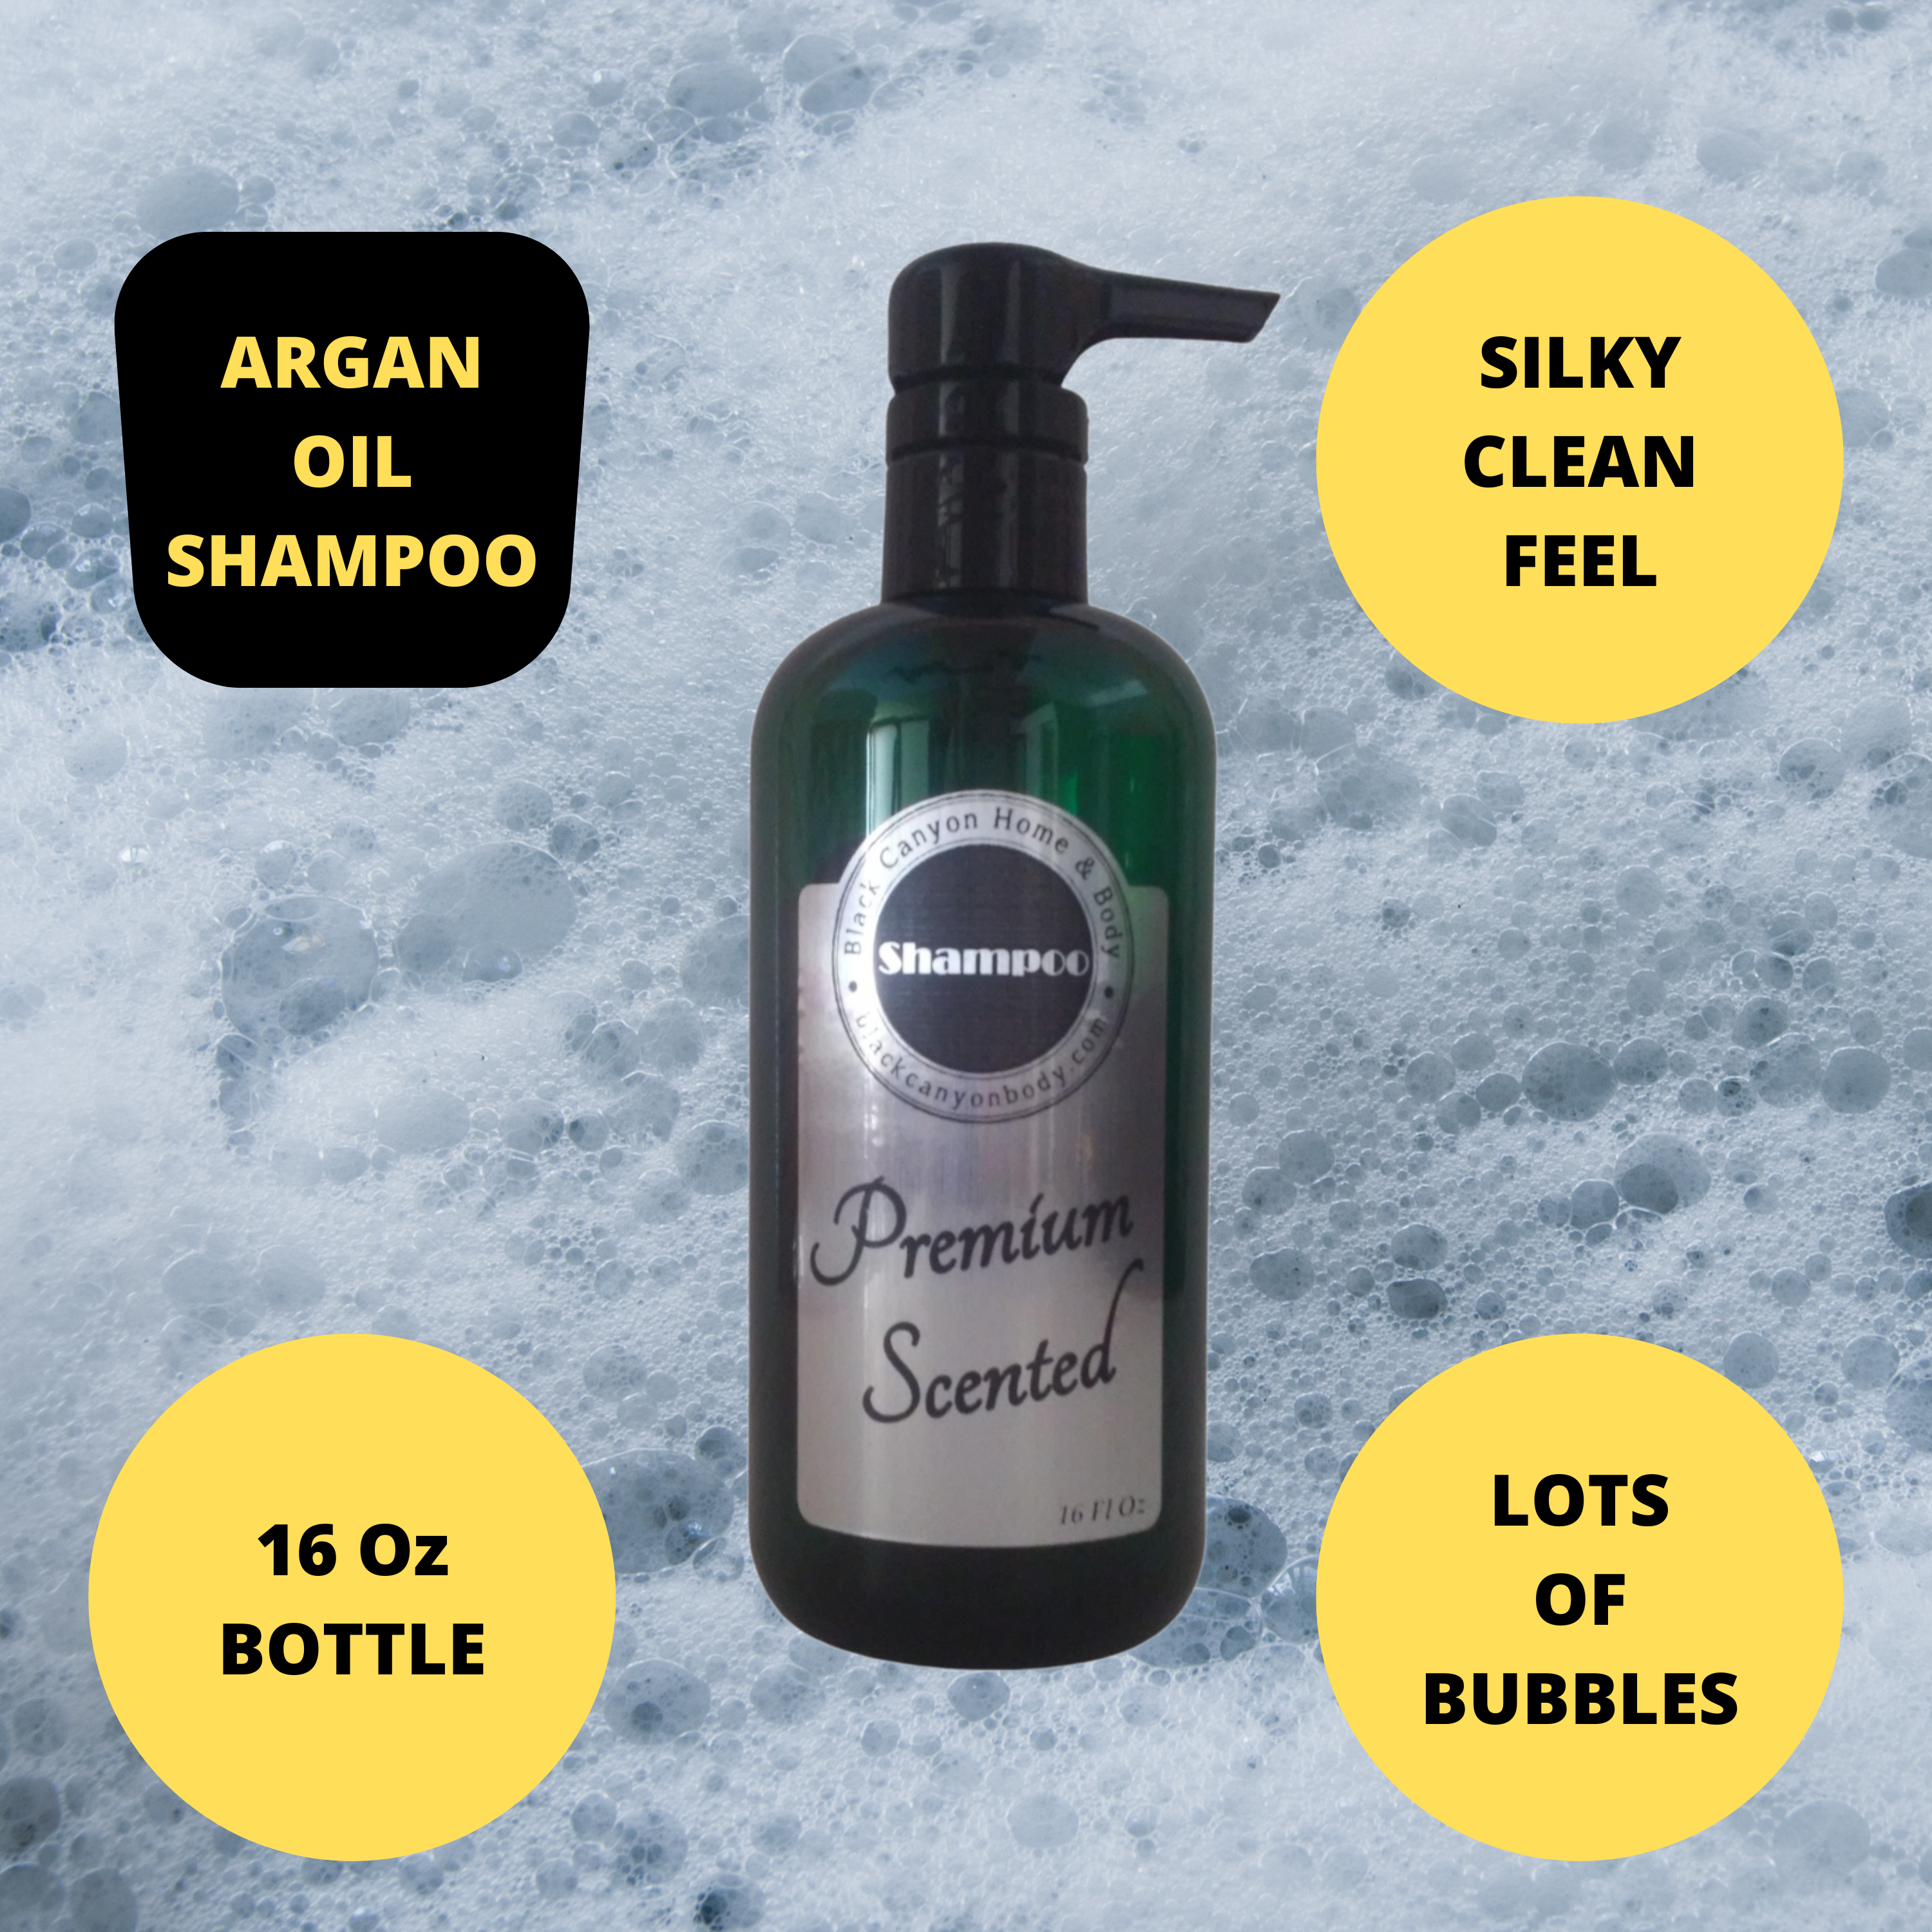 Black Canyon Apricot Mango Scented Shampoo with Argan Oil